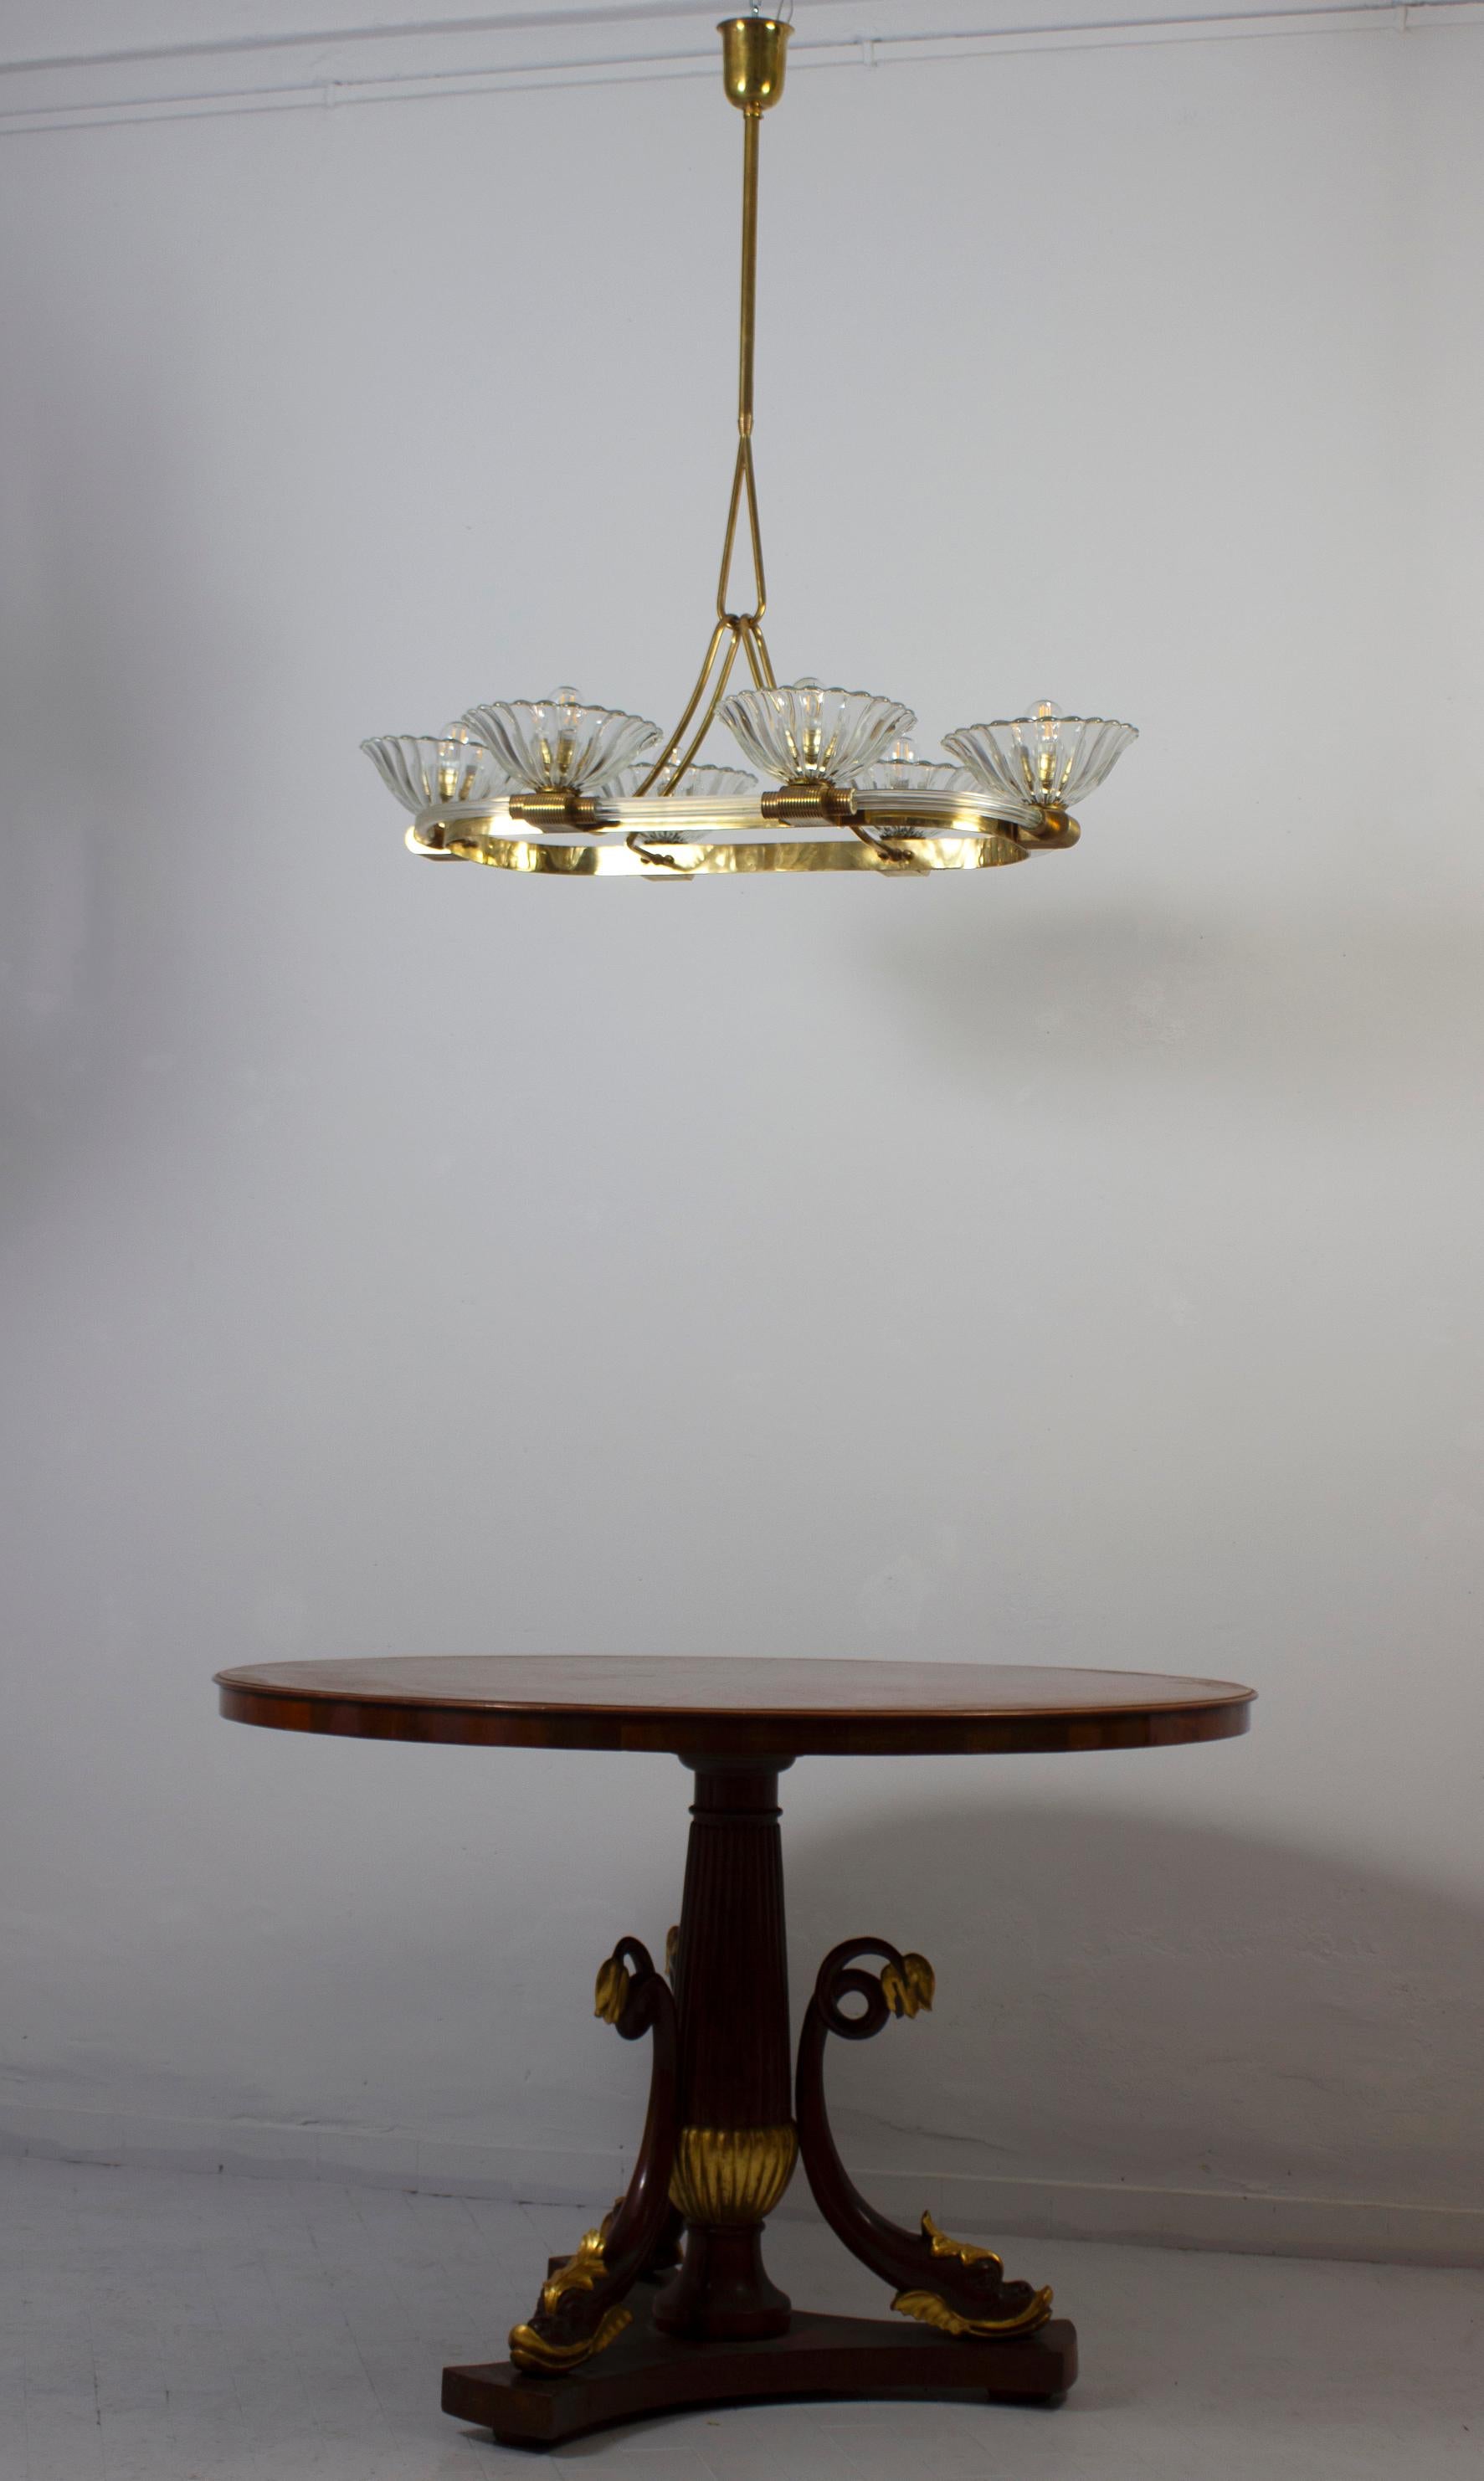  Art Deco Oval Shape Brass and Murano Glass Chandelier by Ercole Barovier 1940 For Sale 3